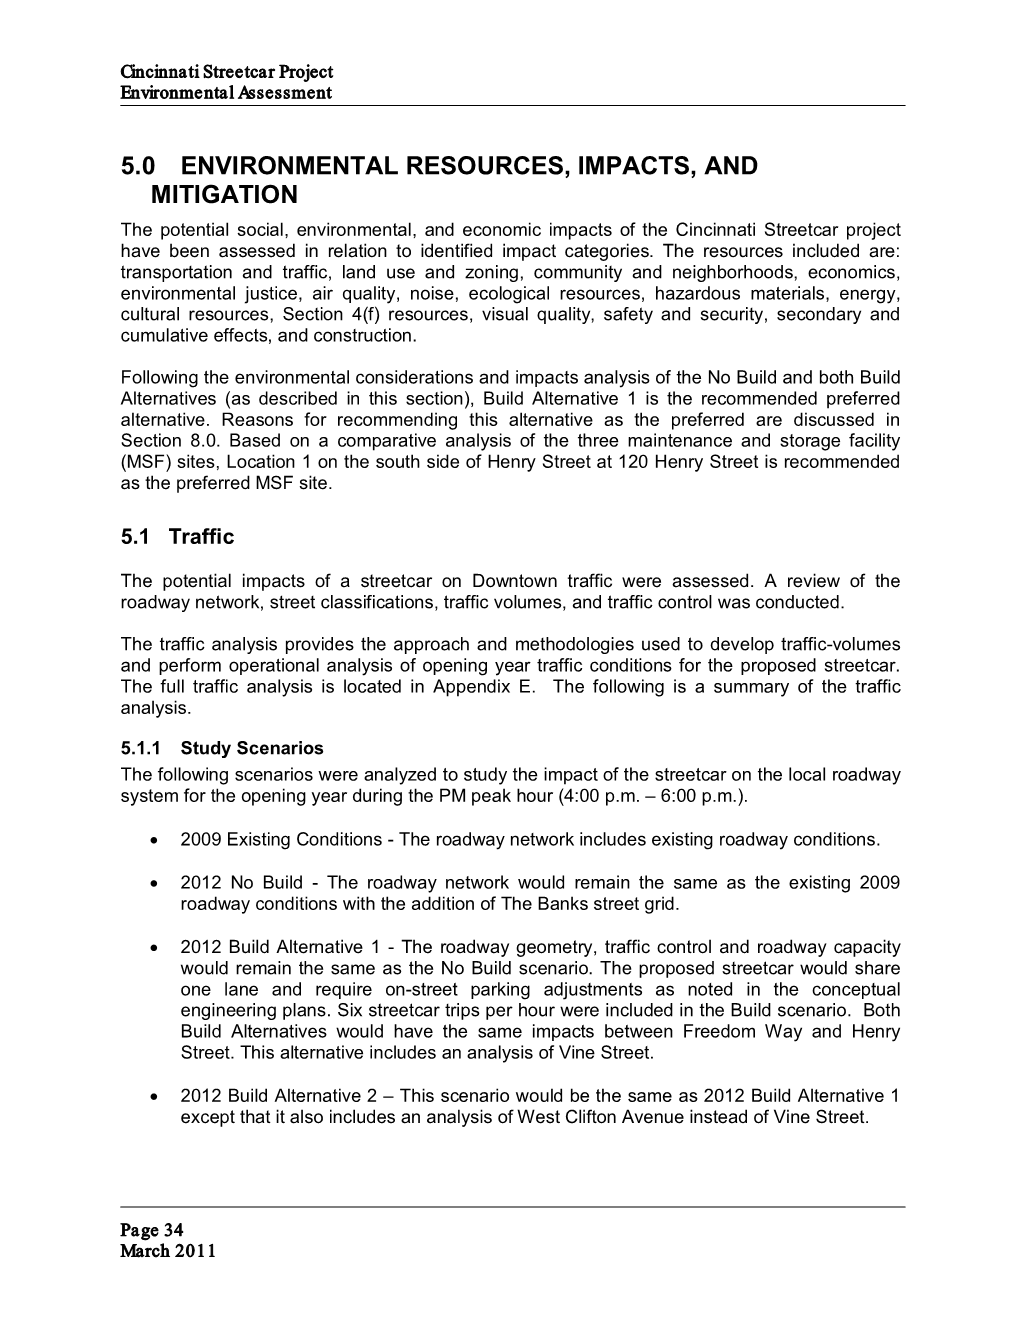 Section 5.0 Environmental Resources, Impacts, and Mitigation